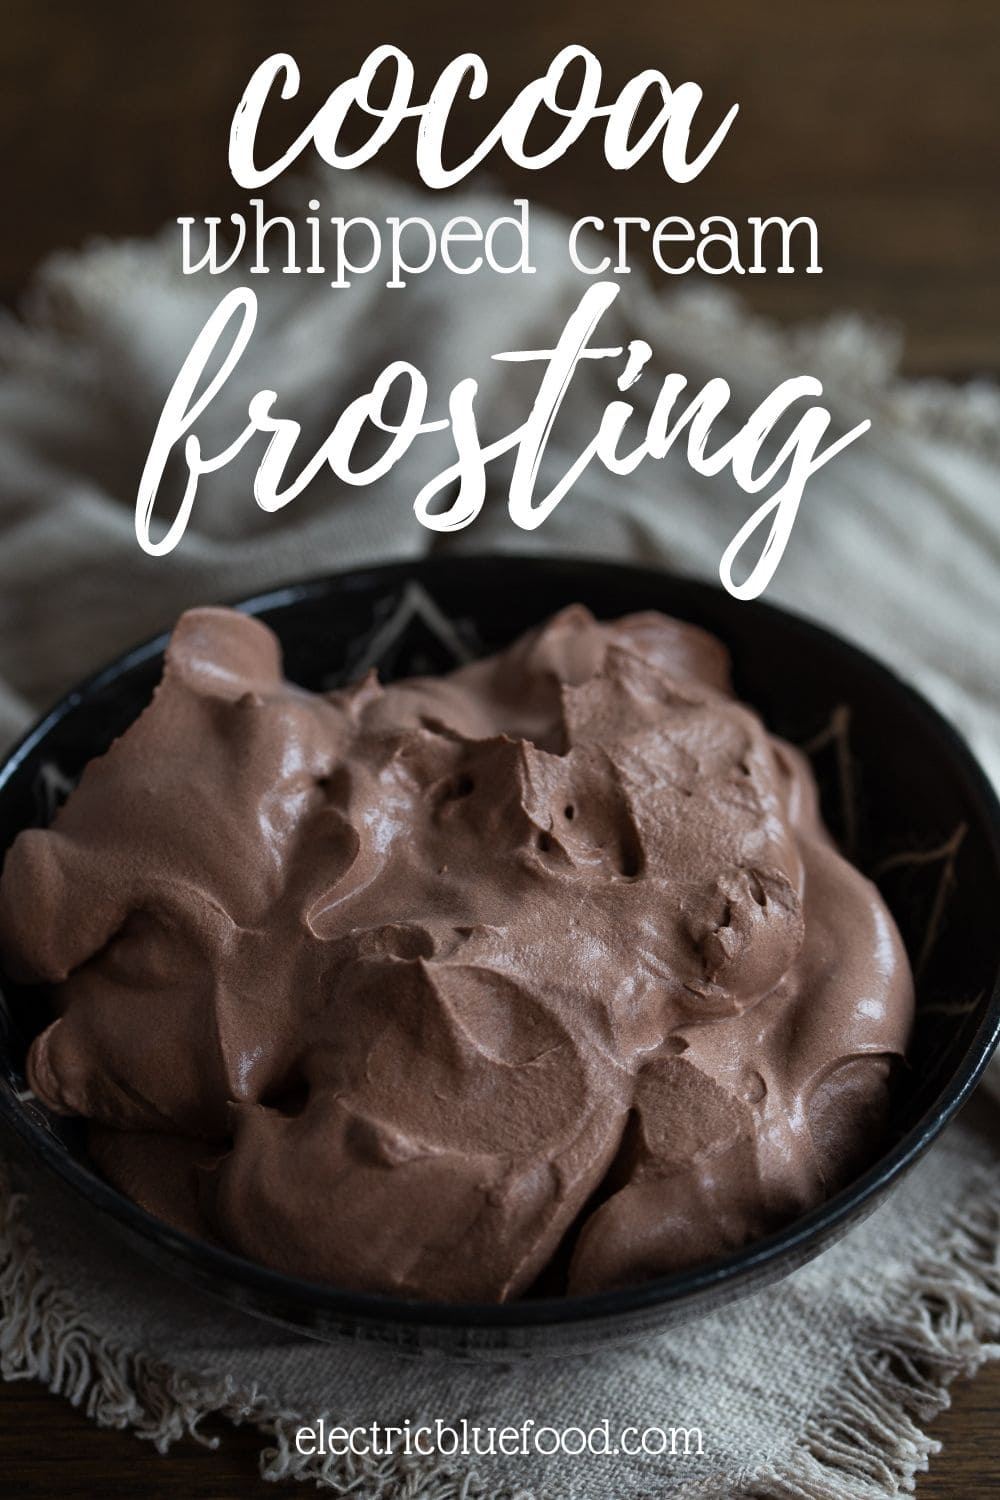 Bittersweet chocolate frosting is a thick and airy frosting that is not too sweet, perfectly delivering the flavour of cocoa. Great to pair with very sweet cakes to tame their sweetness, or with chocolate desserts, to up the chocolate flavour!